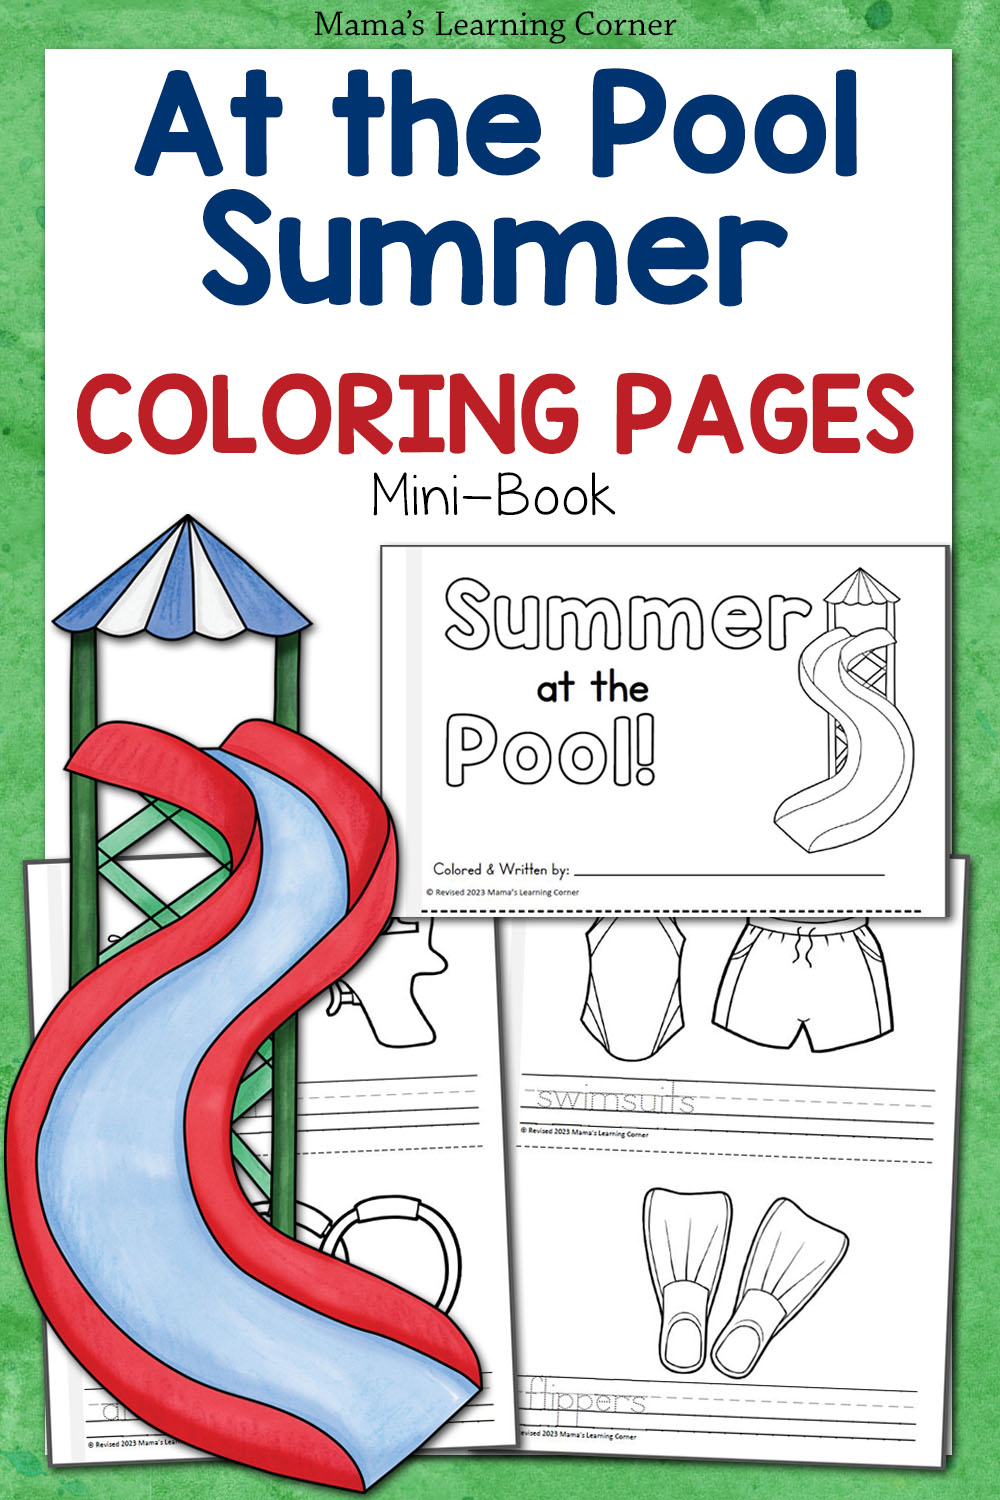 Summer coloring pages at the pool